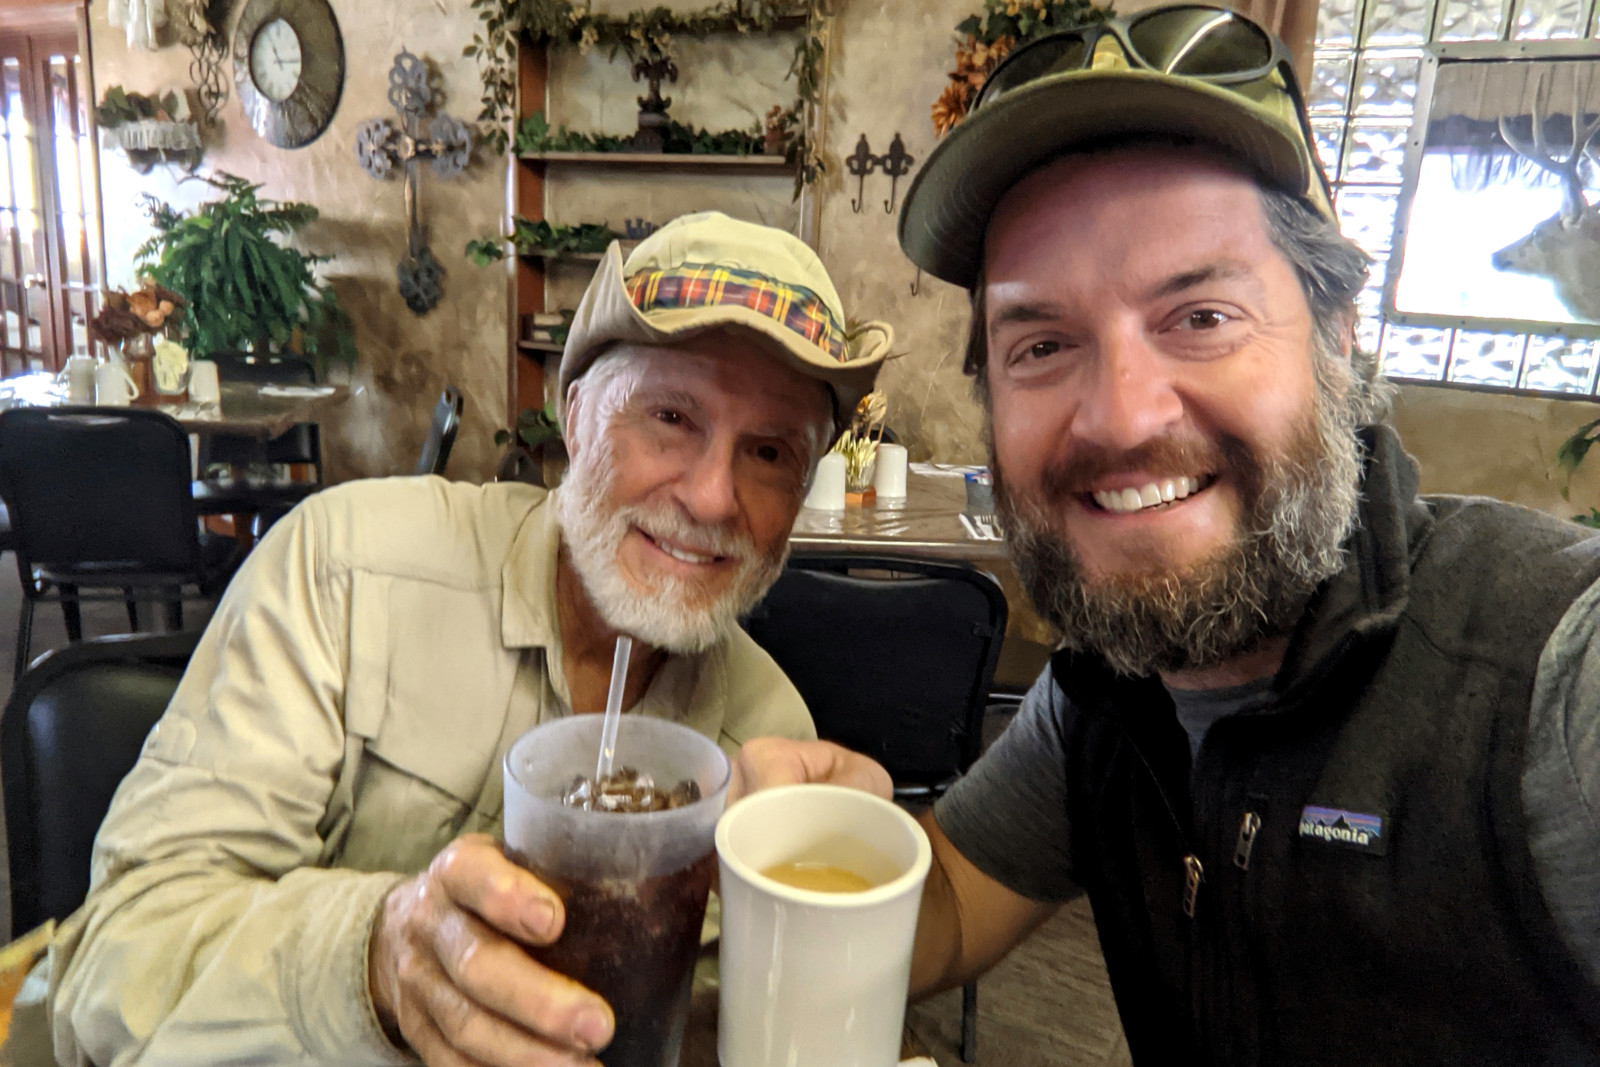 Selfie with Dad aka 'Tartan' and Justin cheersing before brunch in Lima, Montana